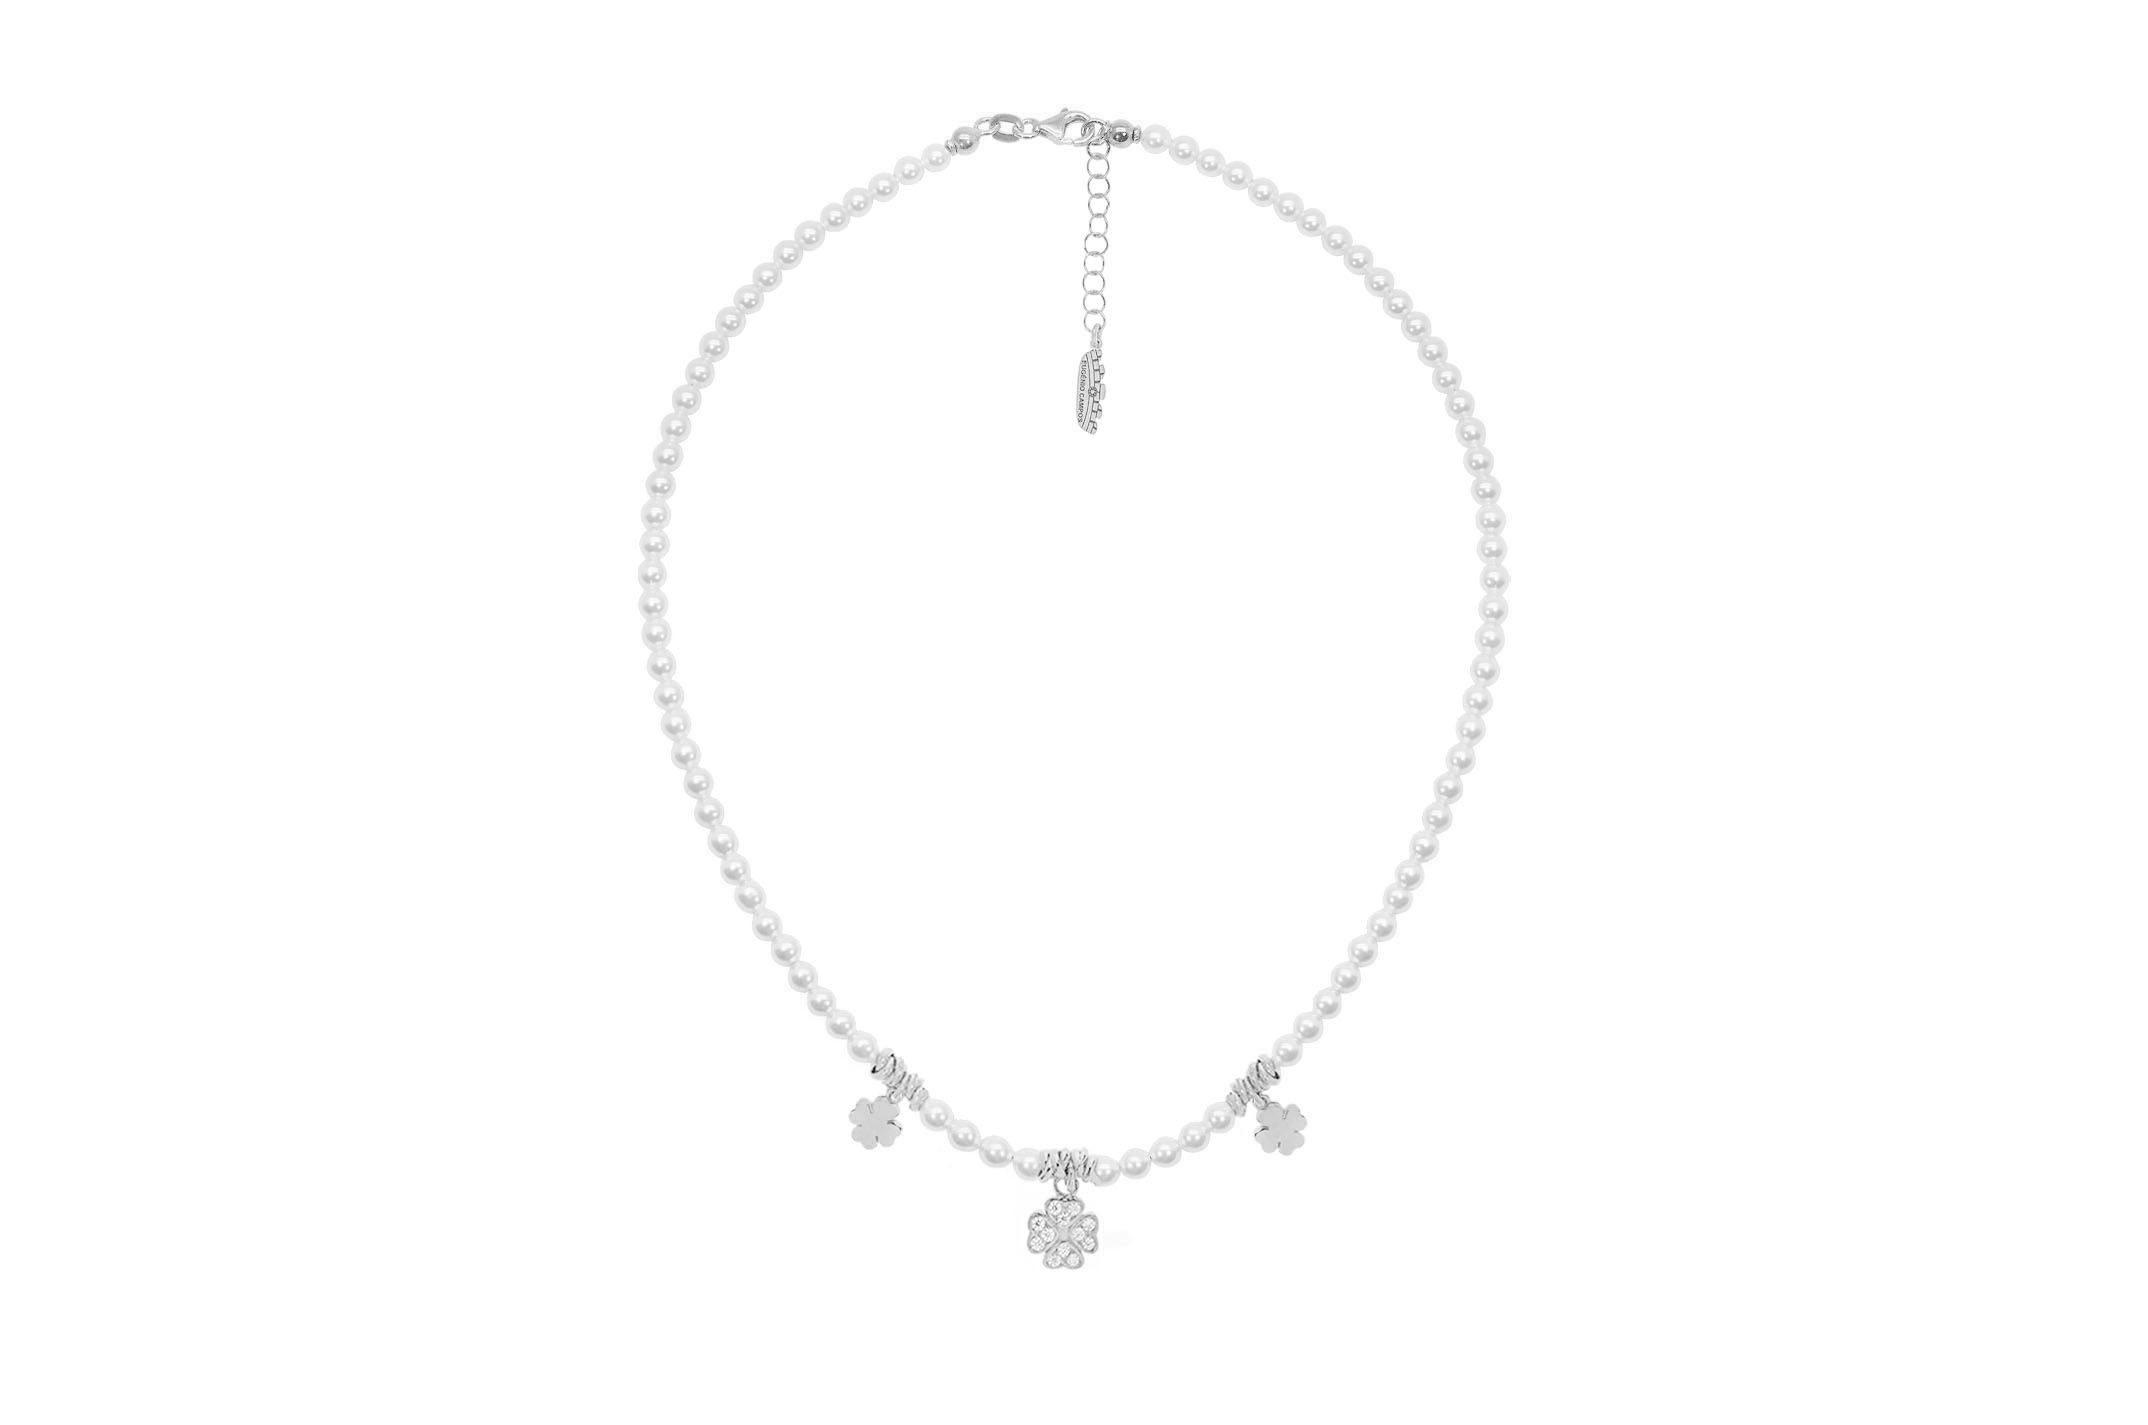 Jewel: necklace;Material: silver 925;Weight: 21.4 gr;Stone: pearl & zirconia;Color: white;Size: 40 cm + 4 cm;Pendent size: 0.5 cm